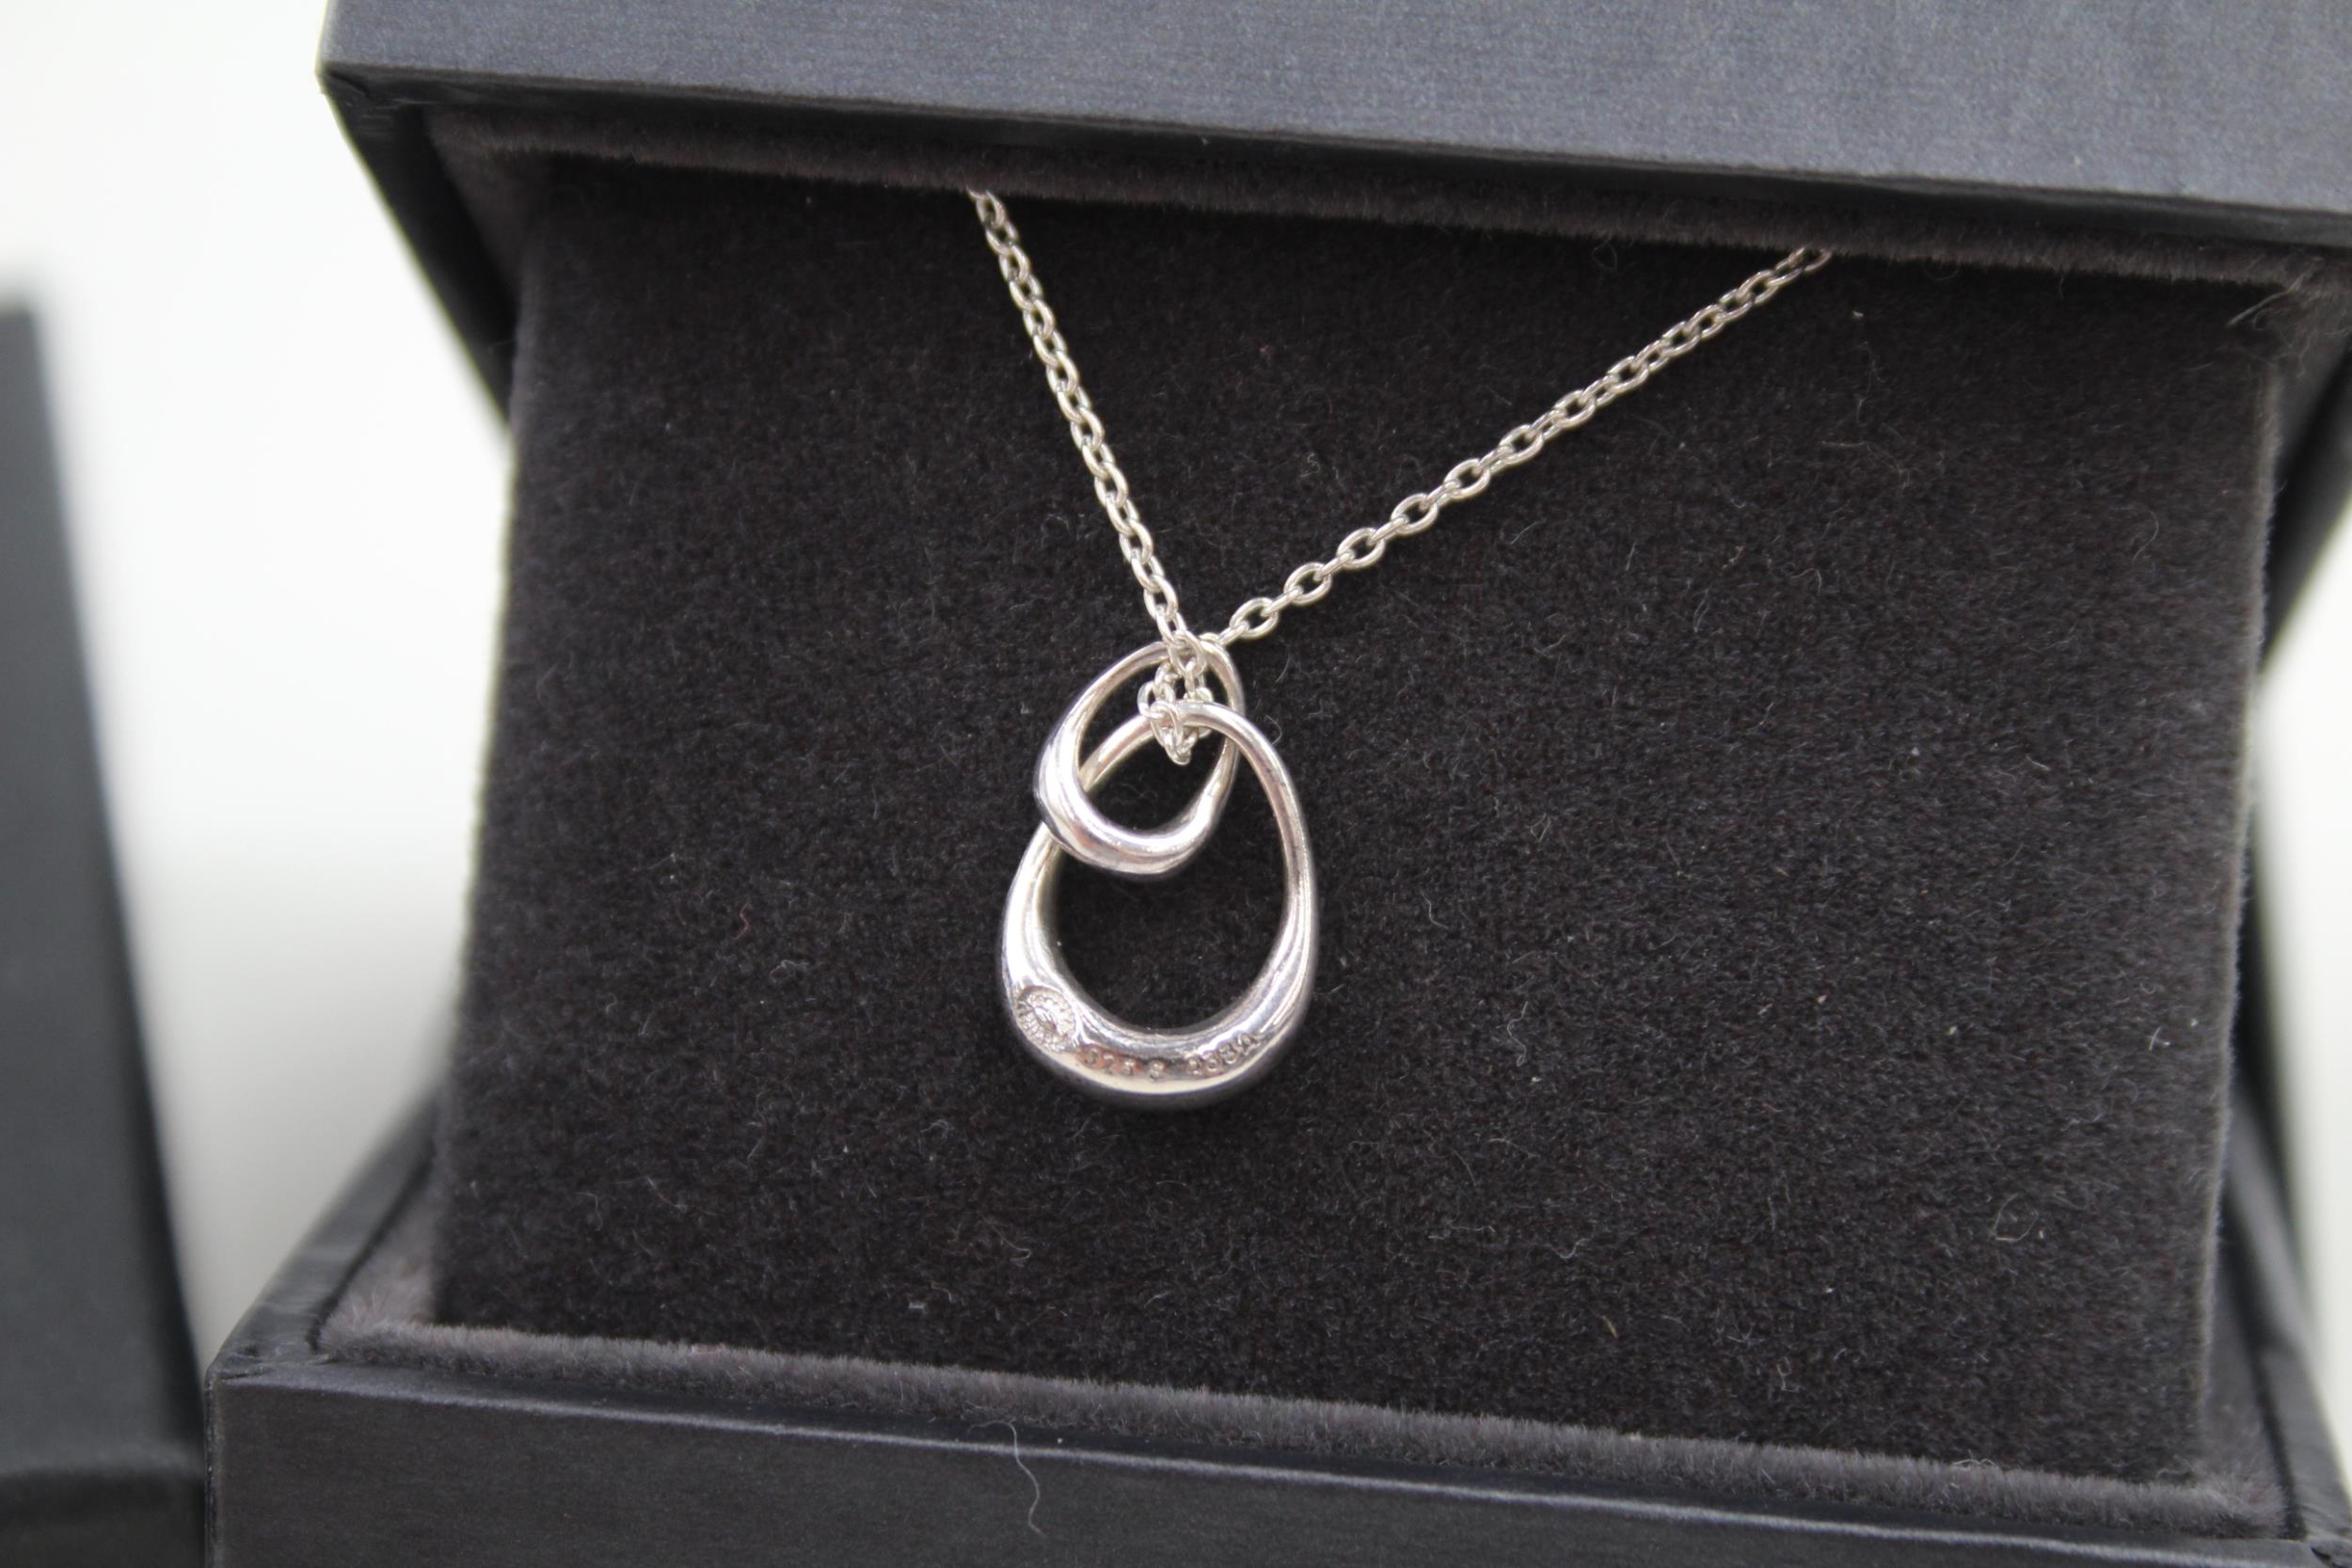 A silver pendant necklace by Georg Jensen (3g) - Image 4 of 5